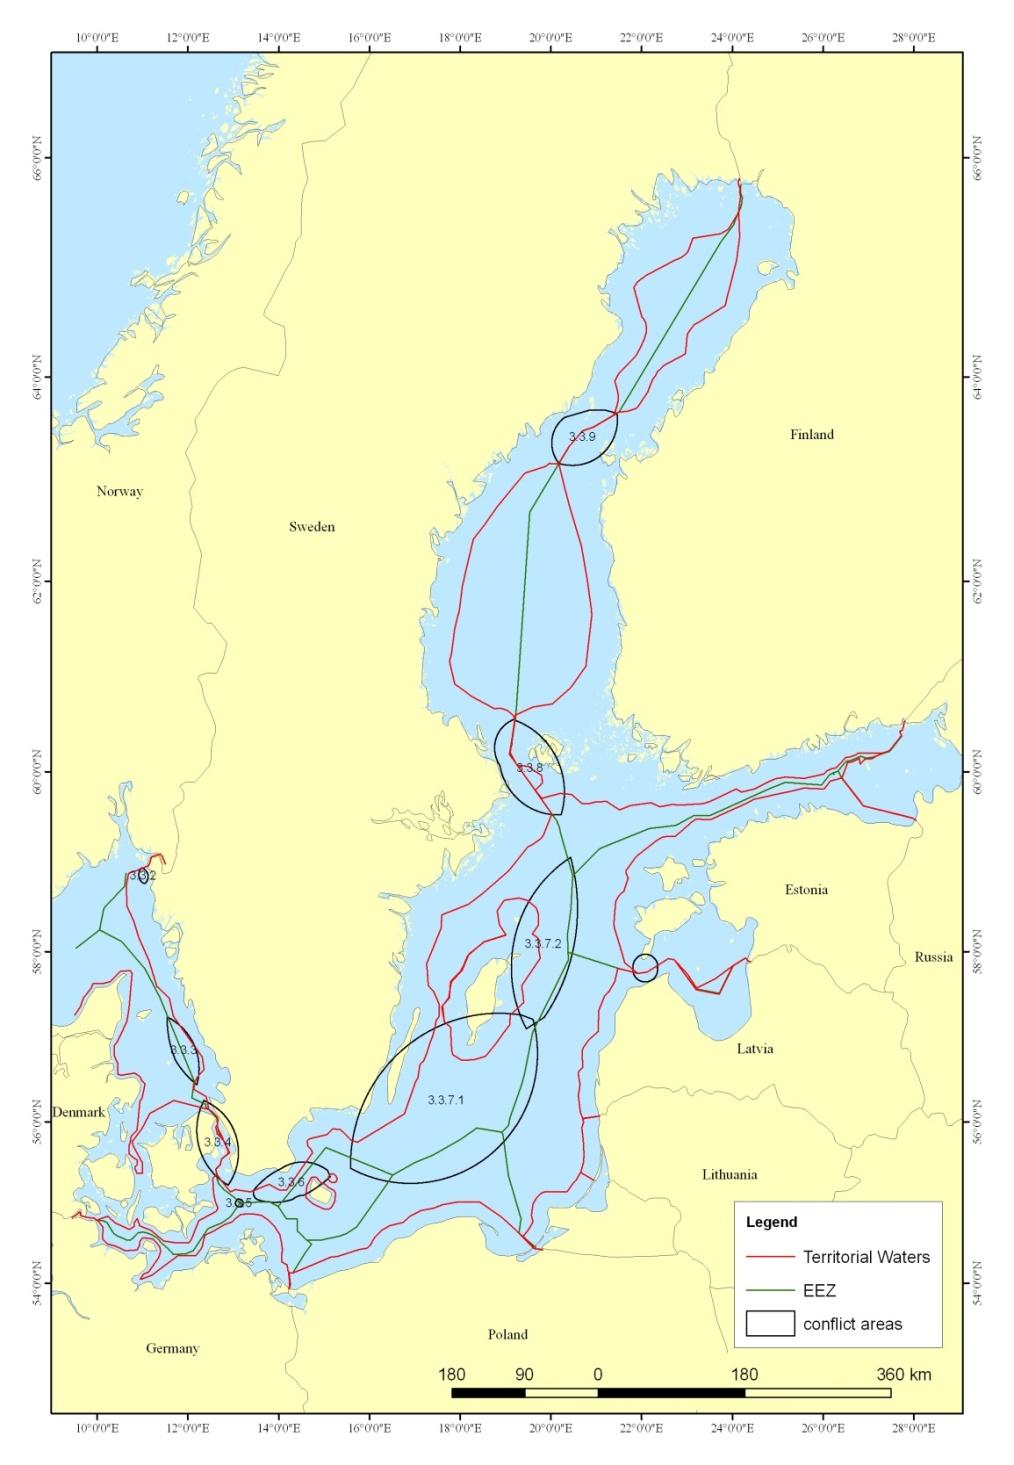 Spatial Conflict Zones in Baltic Sea The Bornholm Gut (Bornholmsgattet) Conflicts between increasing transit shipping (high risk area for maritime accidents), fishery, pipeline infrastructure,